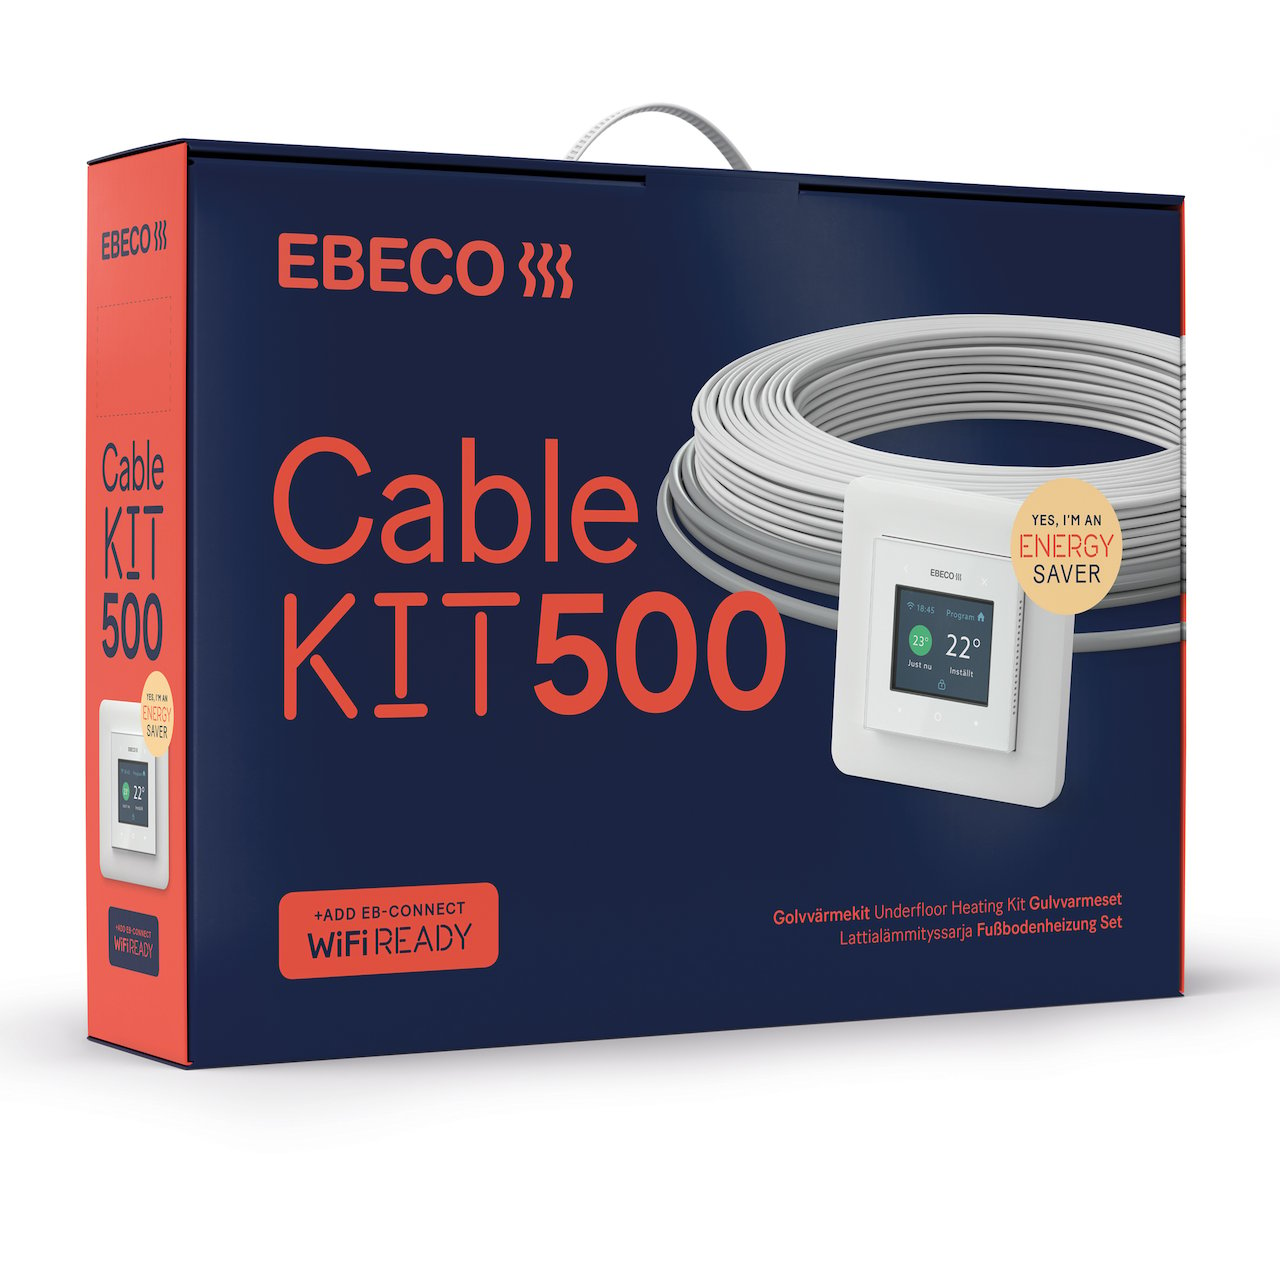 EBECO CABLE KIT 500 73M 810W